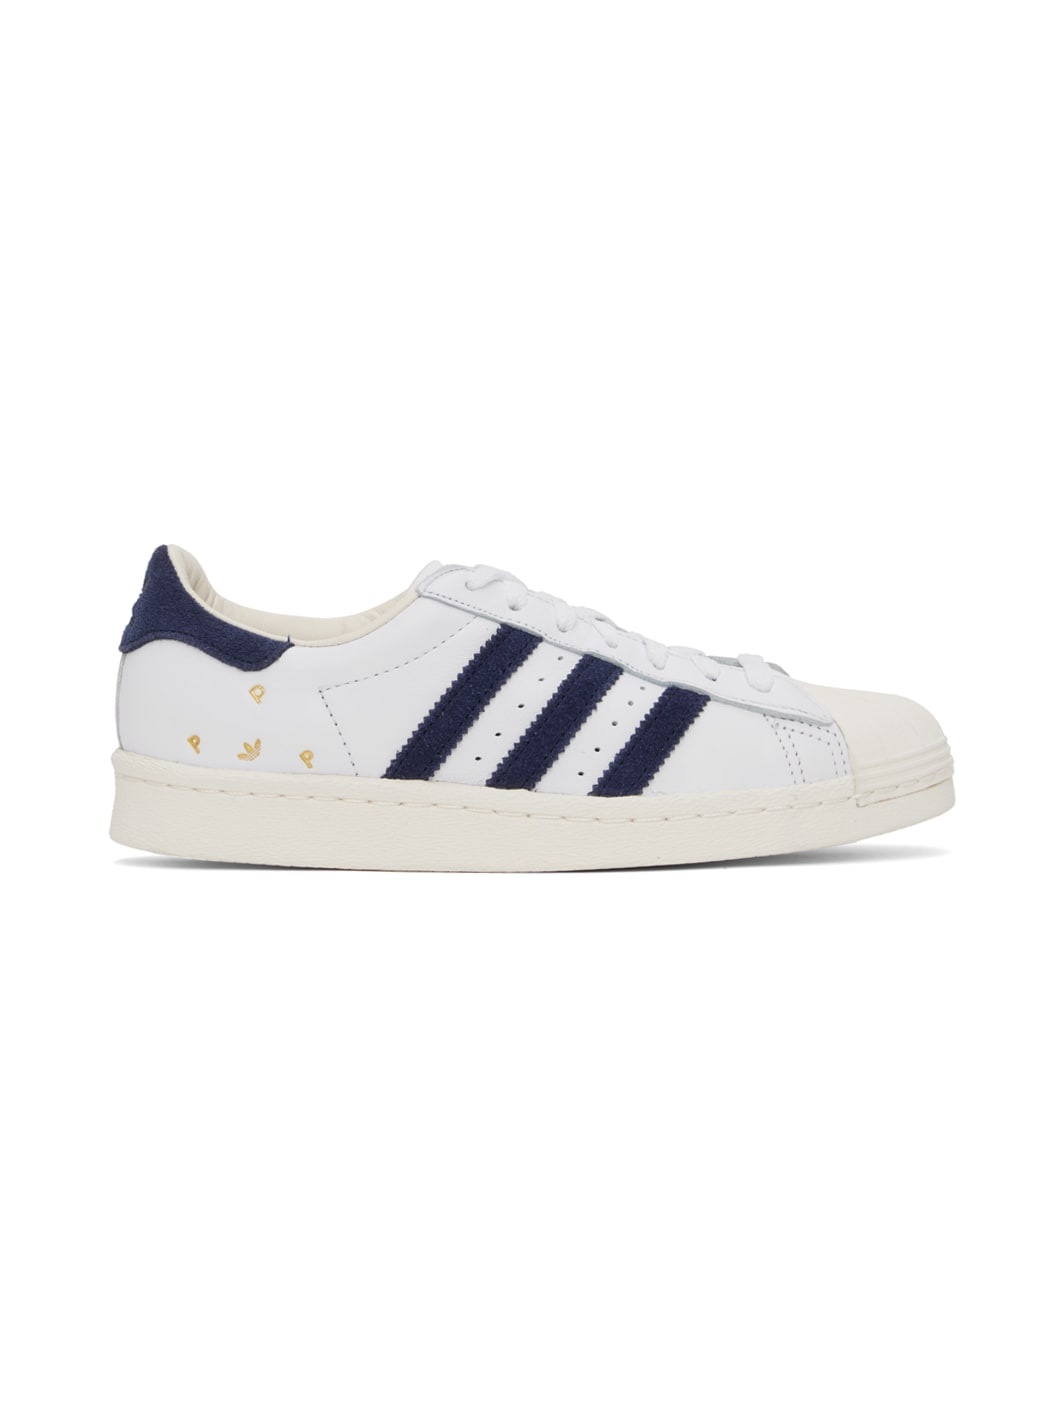 White & Navy Pop Trading Company Edition Superstar ADV Sneakers - 1